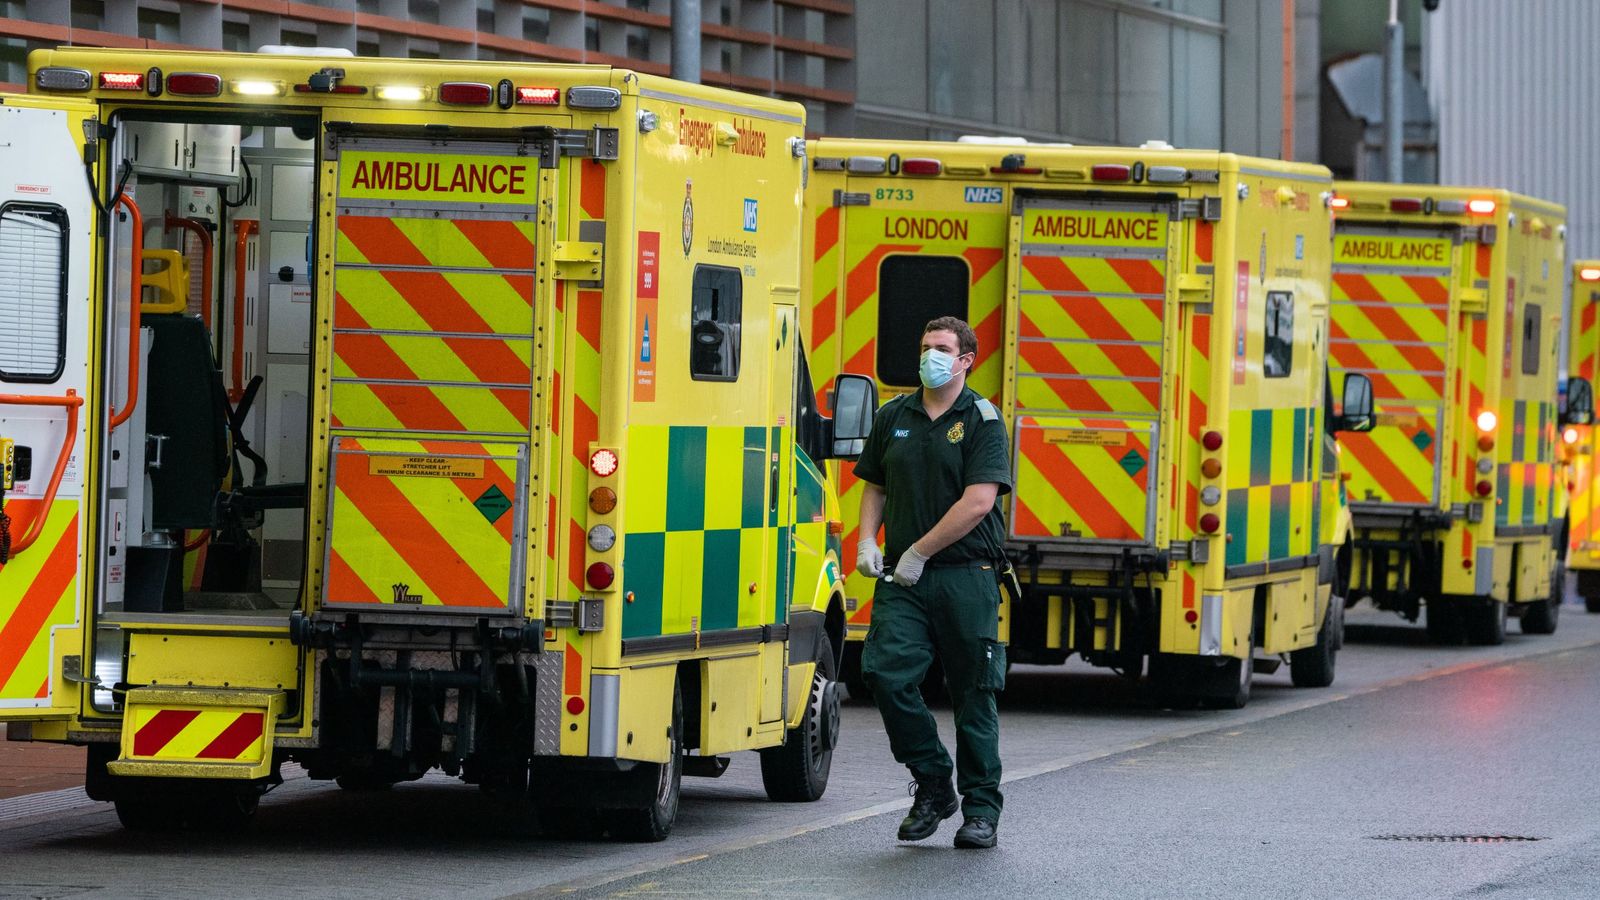 Ambulances will go to 'life-threatening' calls during strikes but may not attend falls, Health Secretary Steve Barclay says